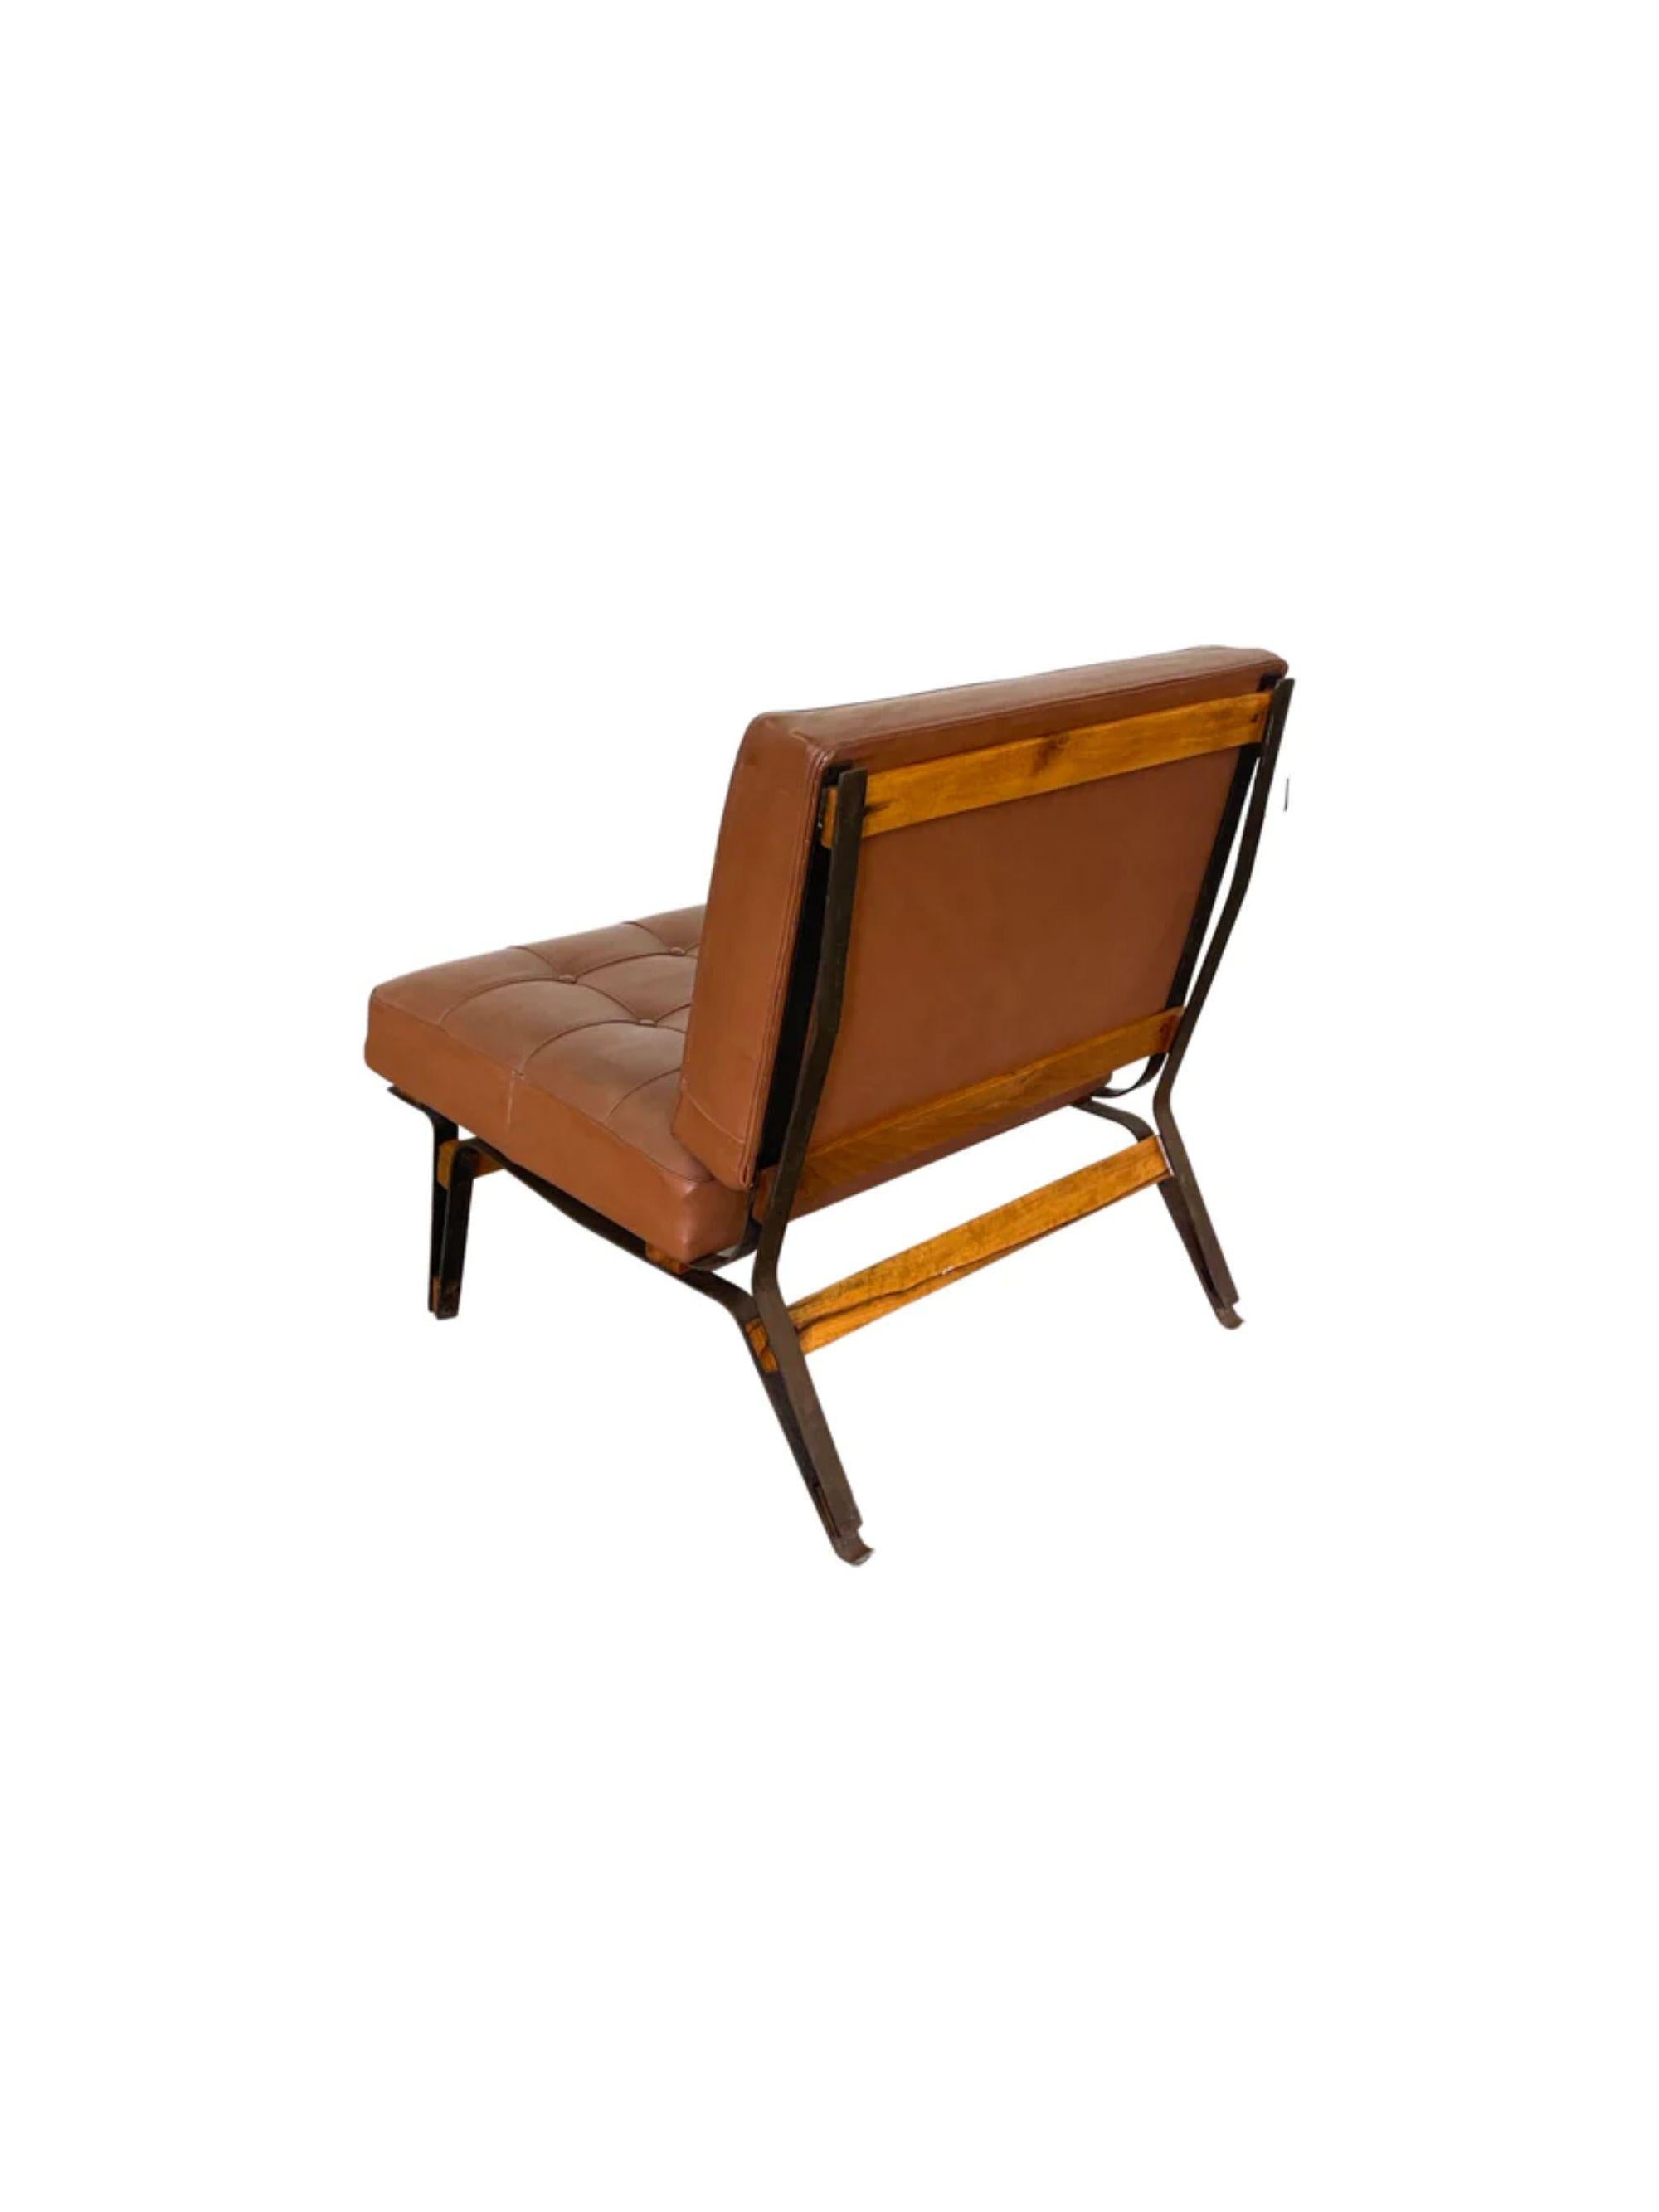 Ico Parisi model 856 rare pair of rare lounge chairs for Cassina, Italy, 1950s.

Dimensions: 30